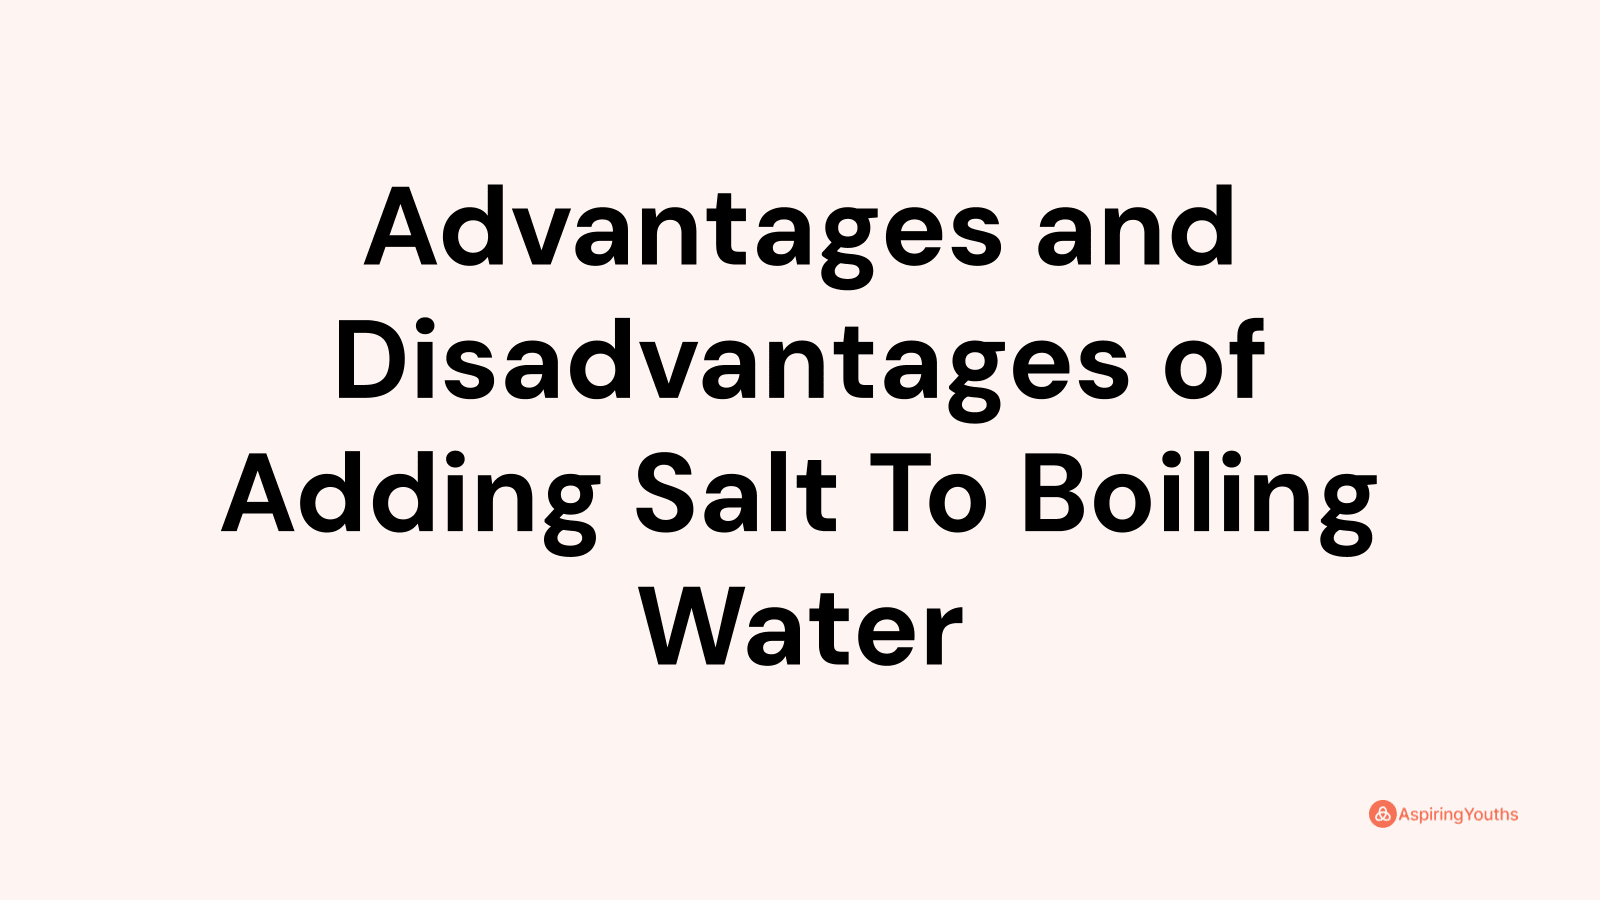 Advantages and disadvantages of Adding Salt To Boiling Water